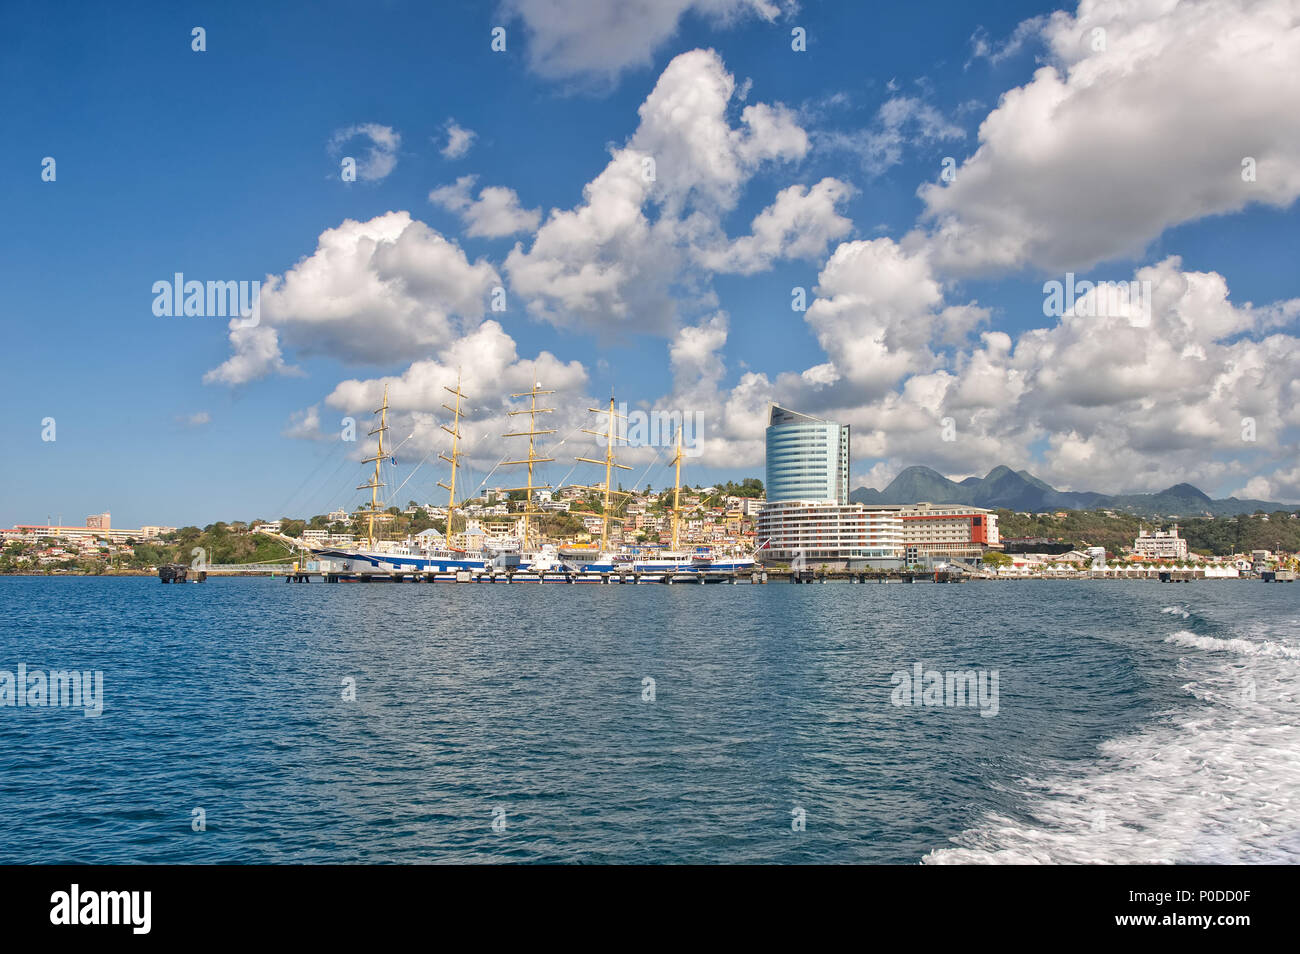 Fort de France view - skyline and volcano on the horizon - Caribbean tropical island - Martinique Stock Photo